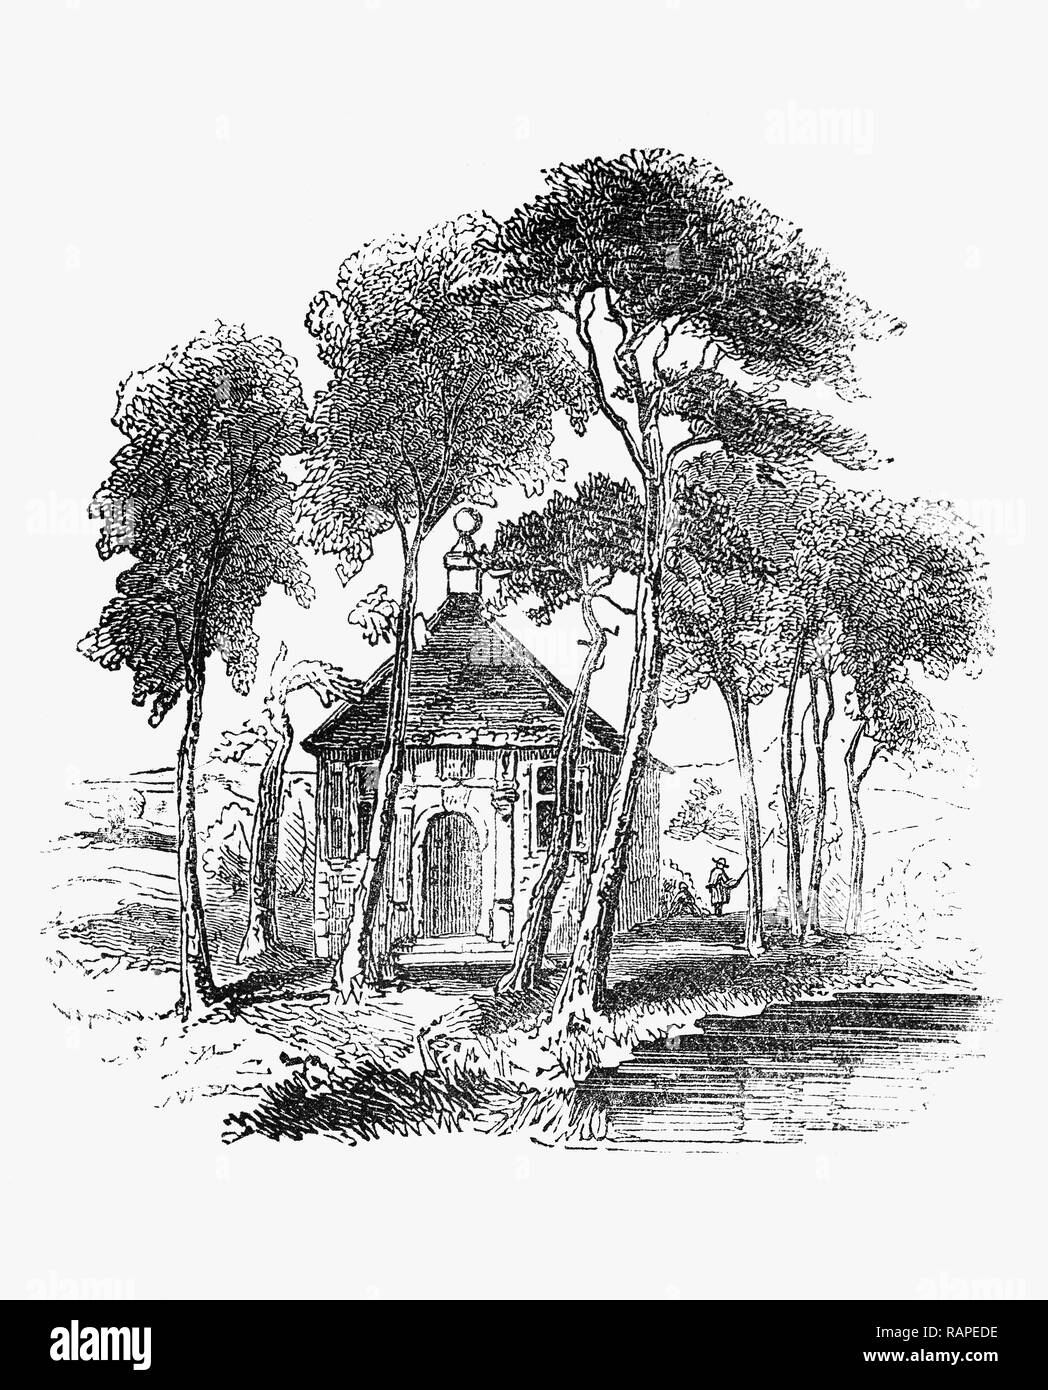 Cotton's Fishing House on the banks of the River Dove. The structure was built by the poet Charles Cotton at Beresford Hall, near the Derbyshire Peak District. His father, Charles Cotton the Elder, was a friend of Ben Jonson, John Selden and Izaak Walton. His friendship with Izaak Walton began about 1655,  and Cotton contributed a section 'Instructions how to angle for a trout or grayling in a clear stream', to Walton's The Compleat Angler; the additions consisted of twelve chapters on fishing in clear water, which he understood largely but not exclusively to be fly fishing. Stock Photo